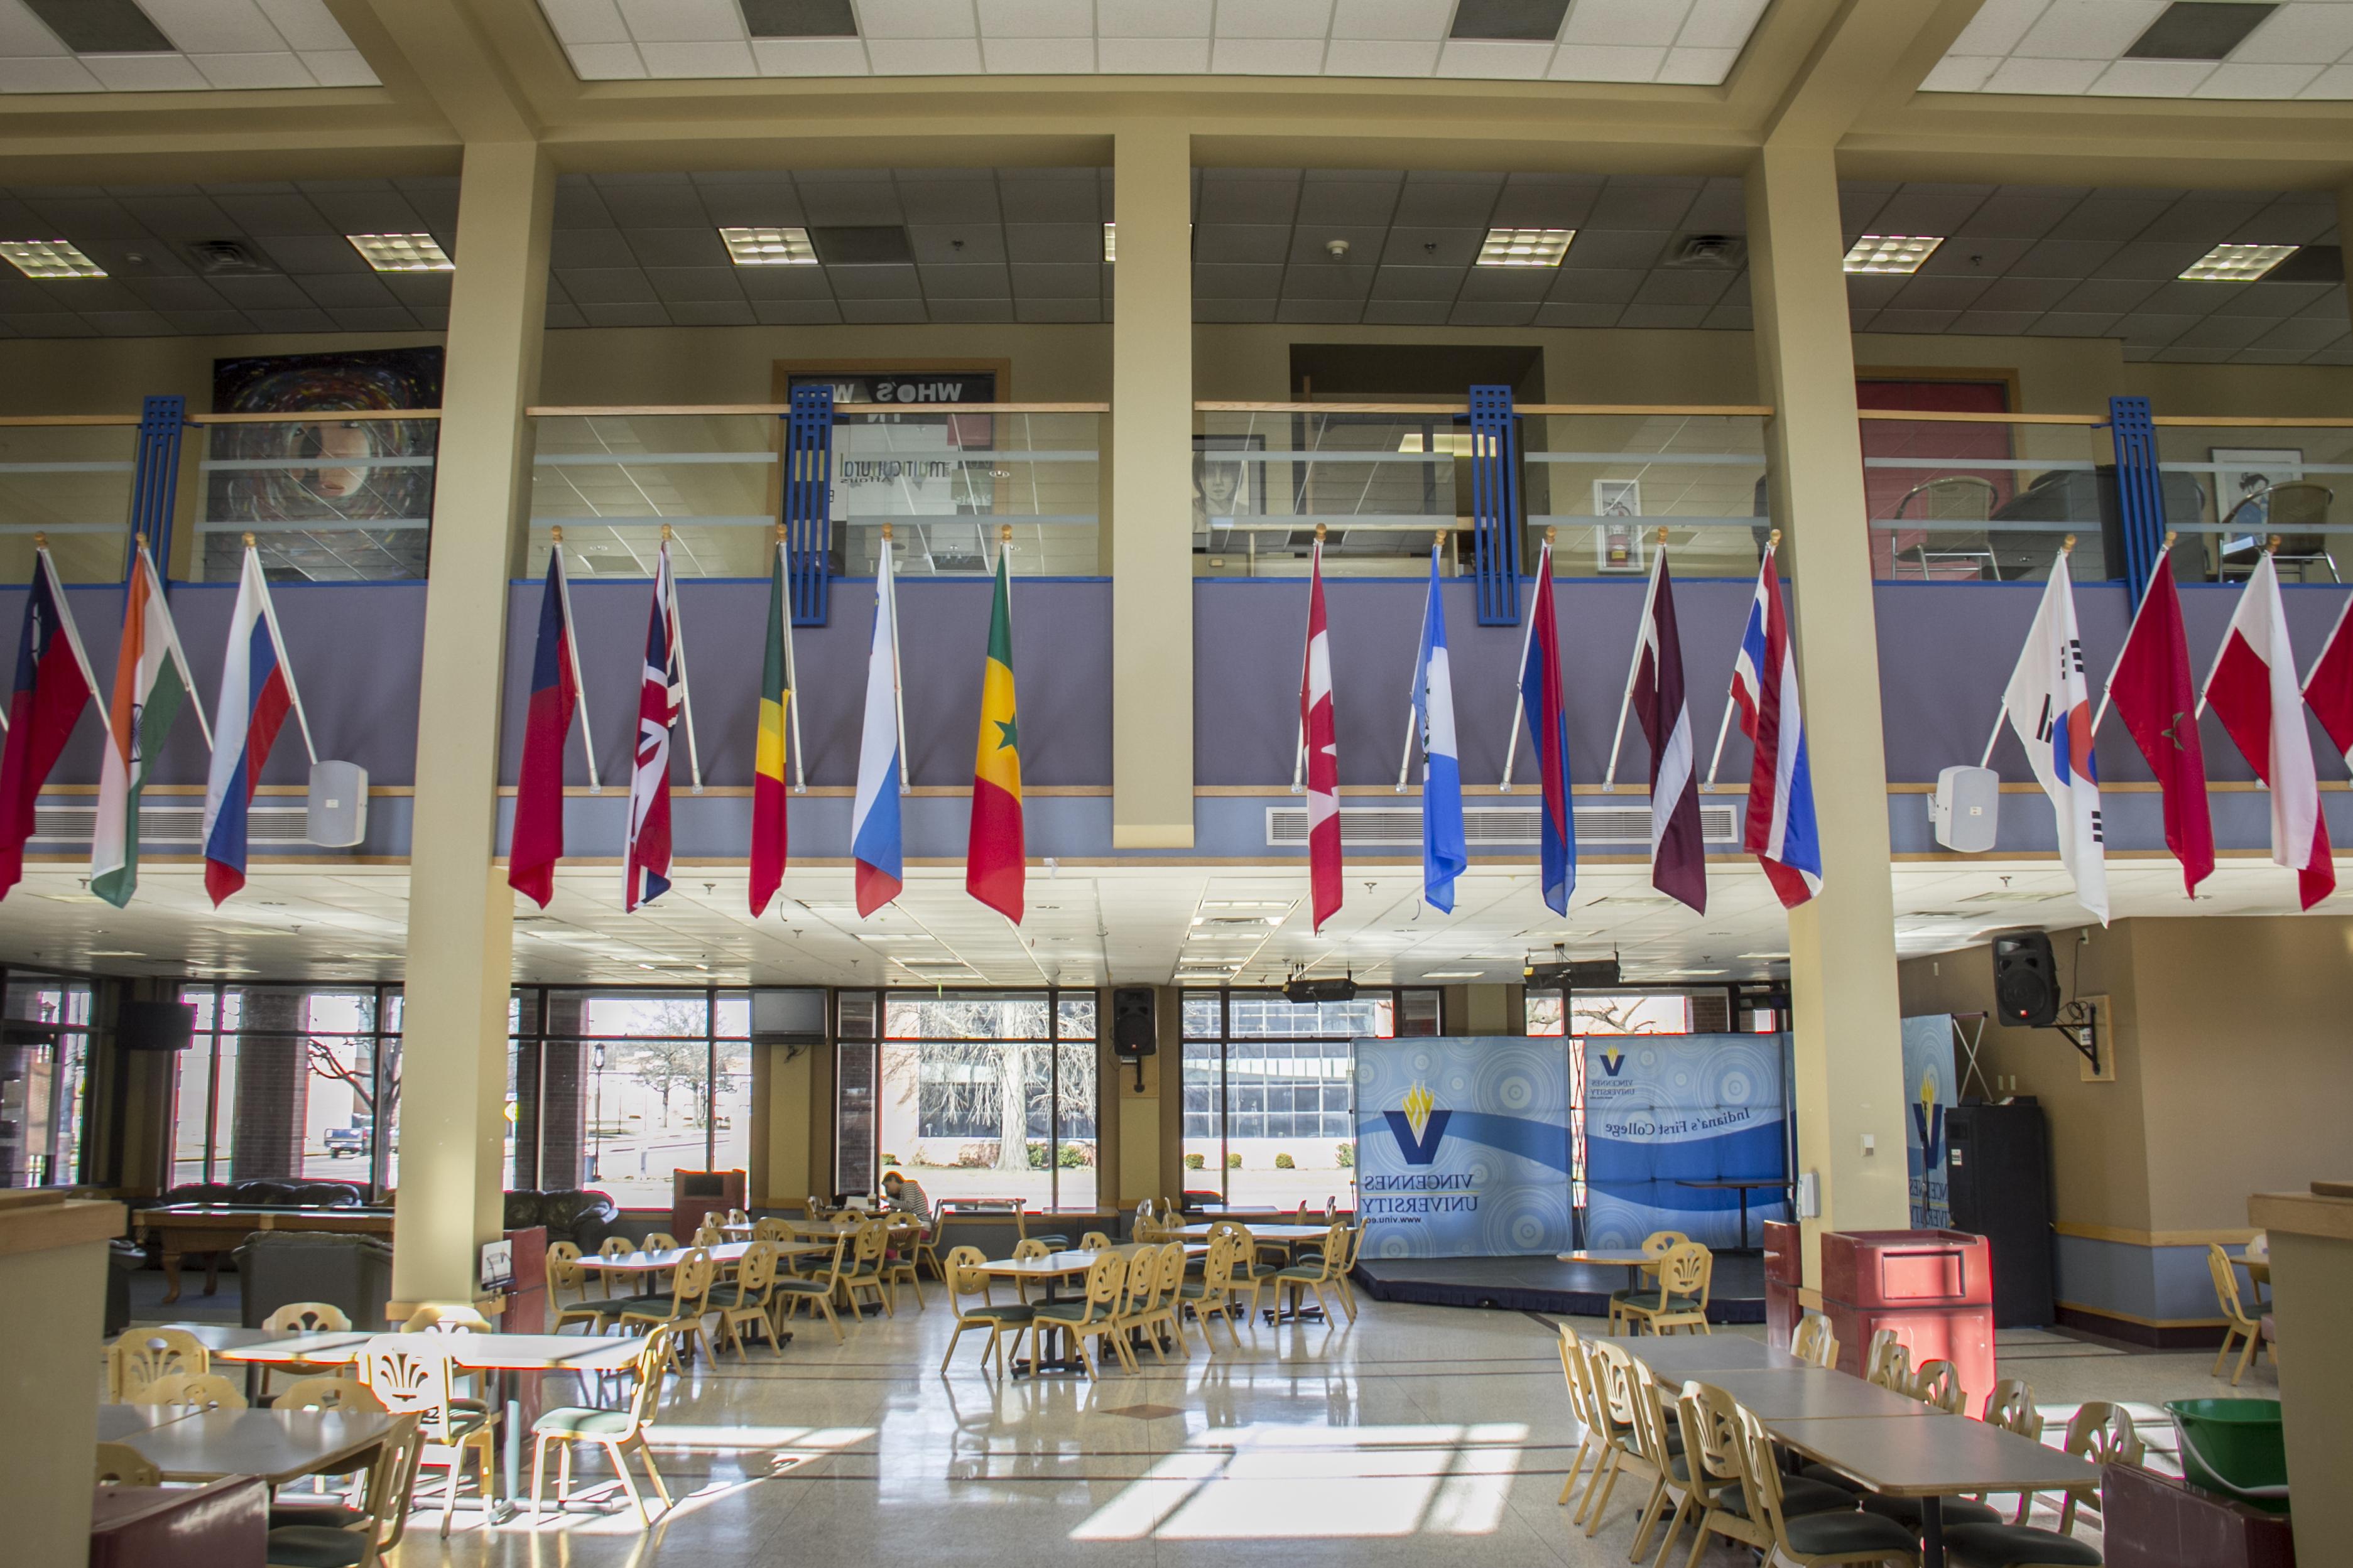 International flags on display in Beckes